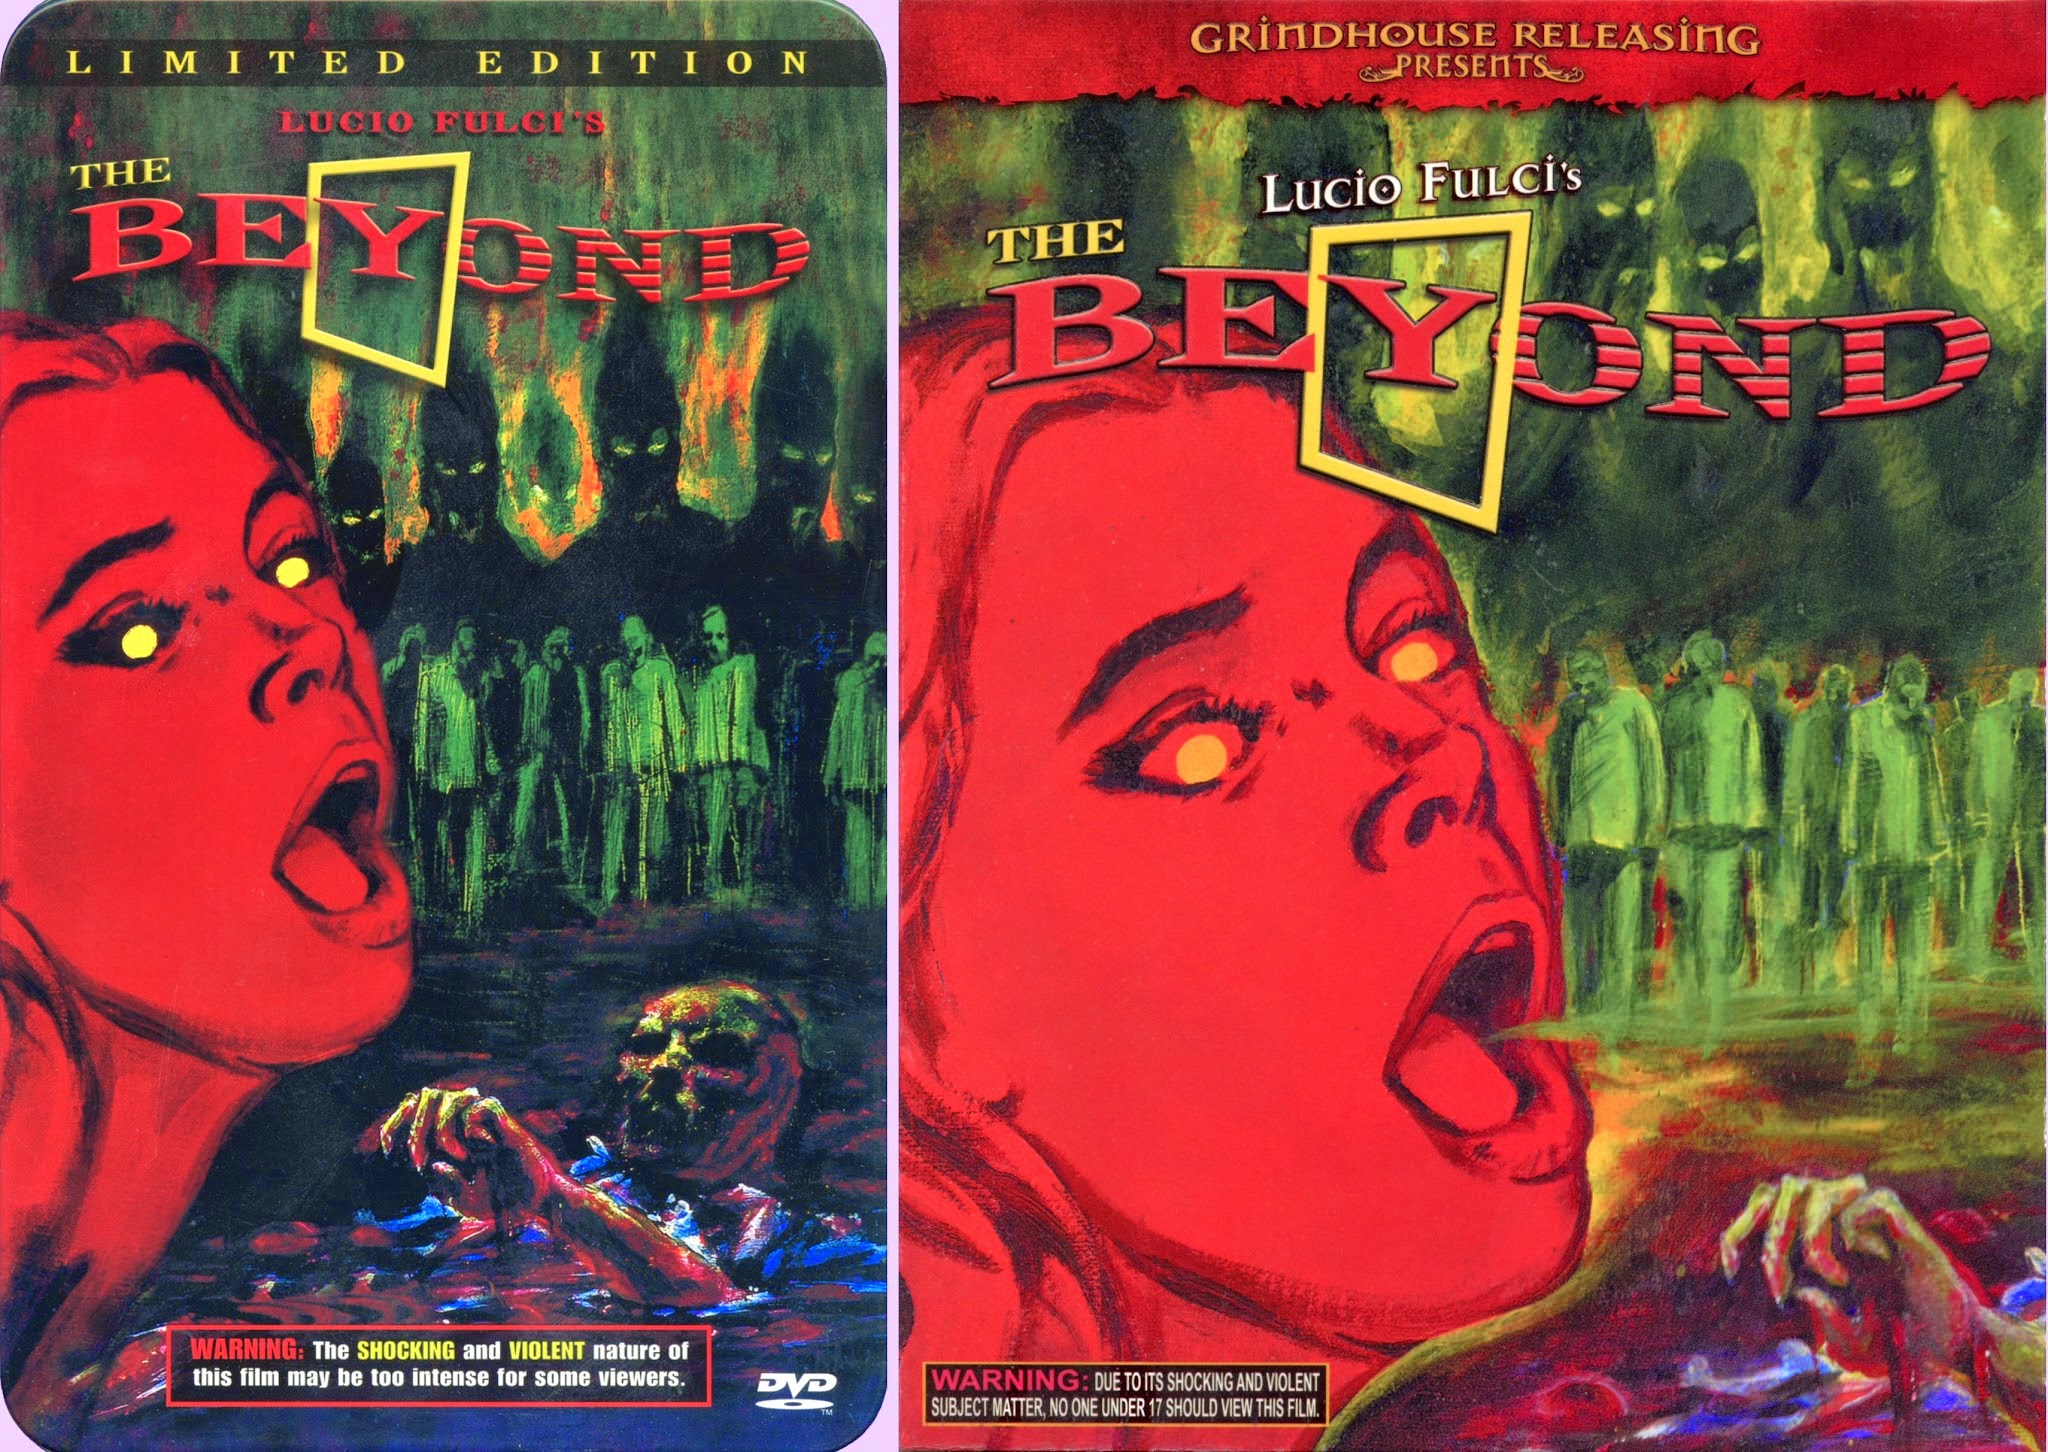 DVD Exotica: Beyond Grindhouse's The Beyond (DVD/ Blu-ray Comparison)